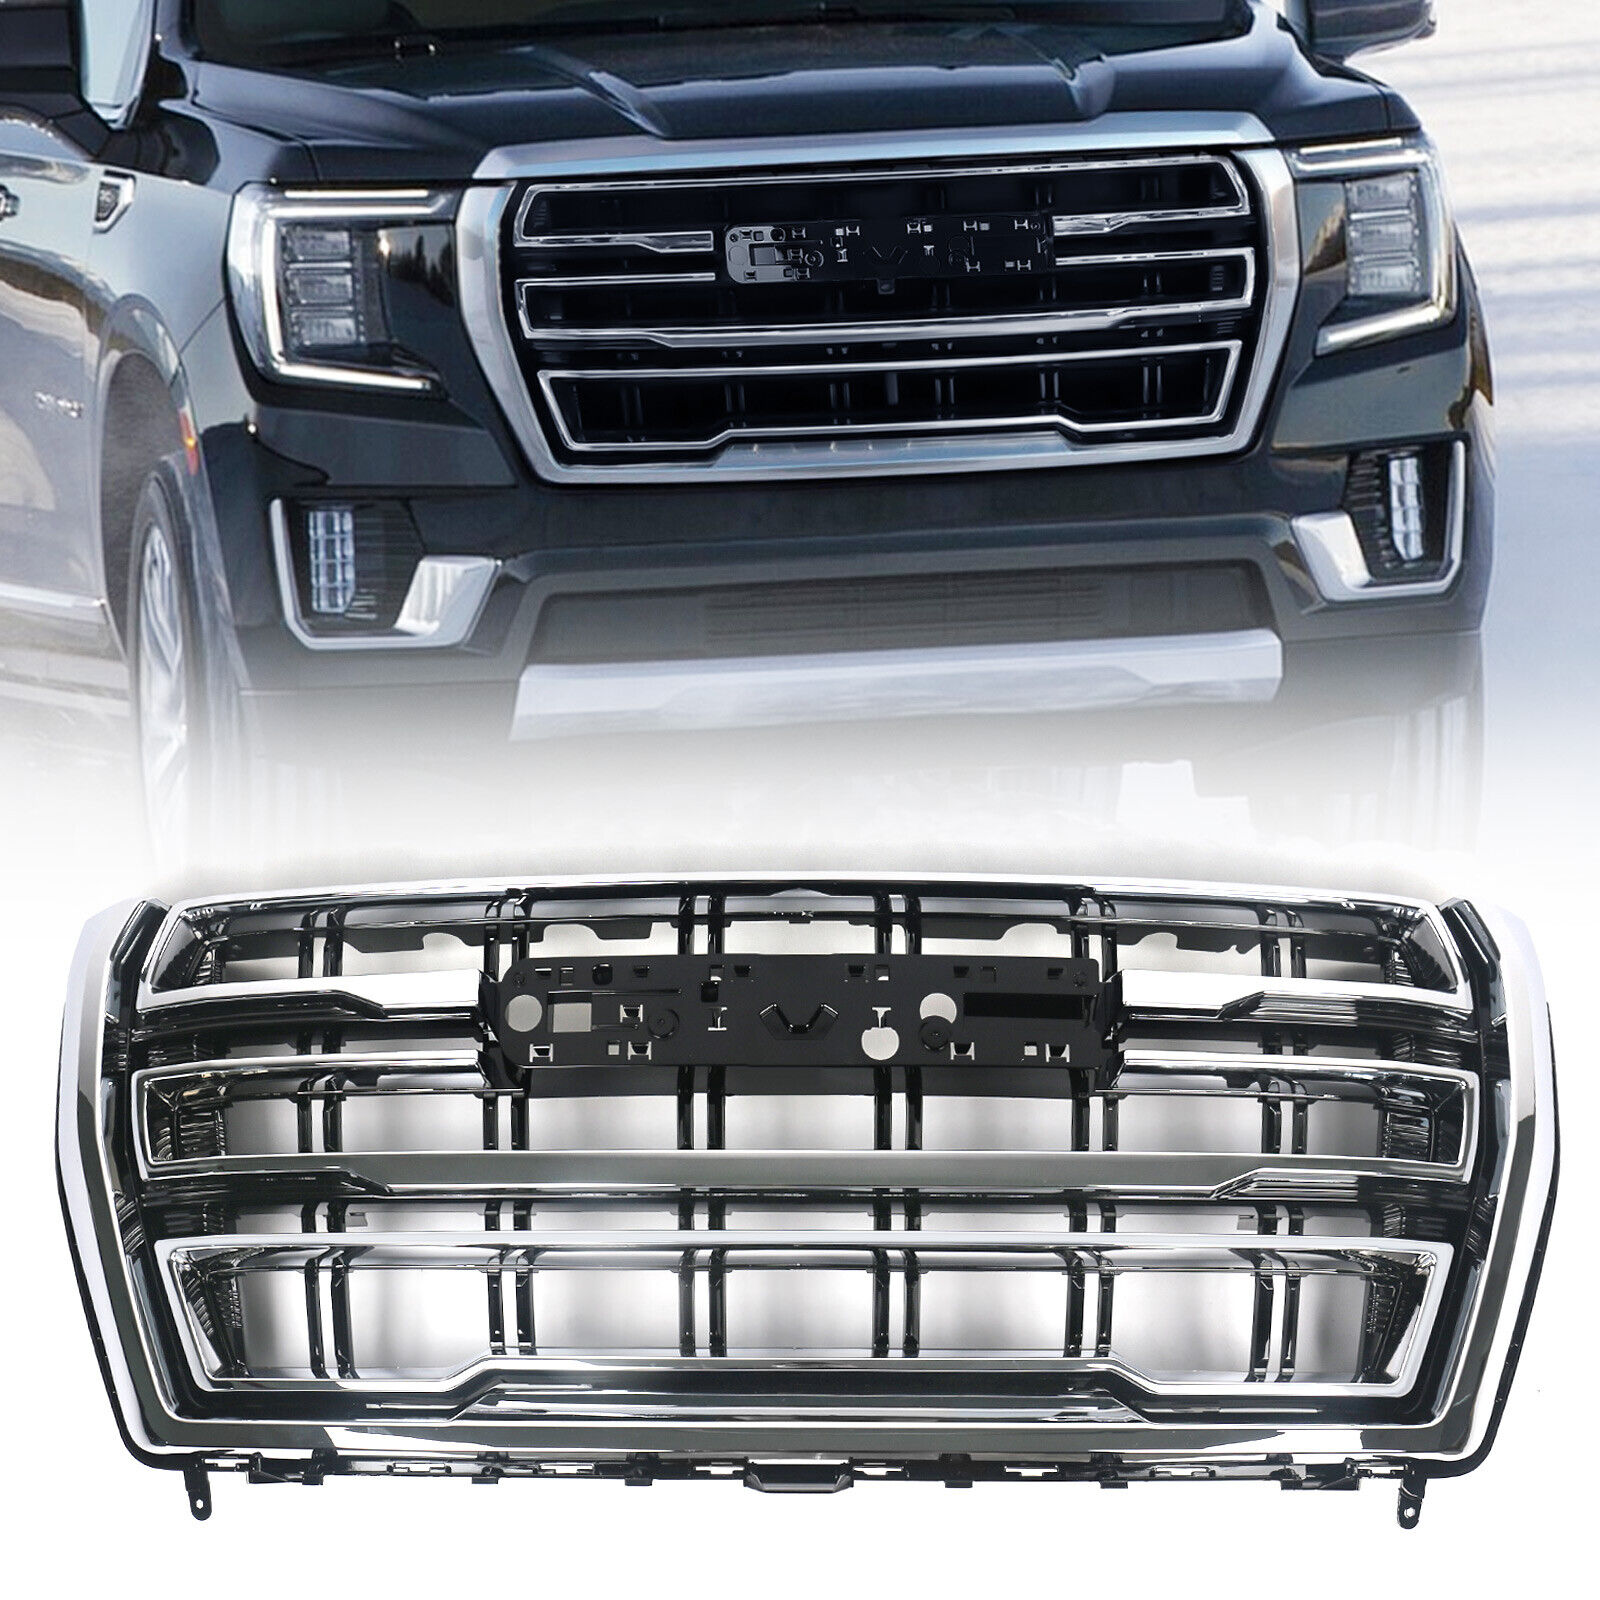 Chrome grille Fits 2021 2022 2023 GMC YUKON XL SLT AT4 Front Bumper Hood Grill